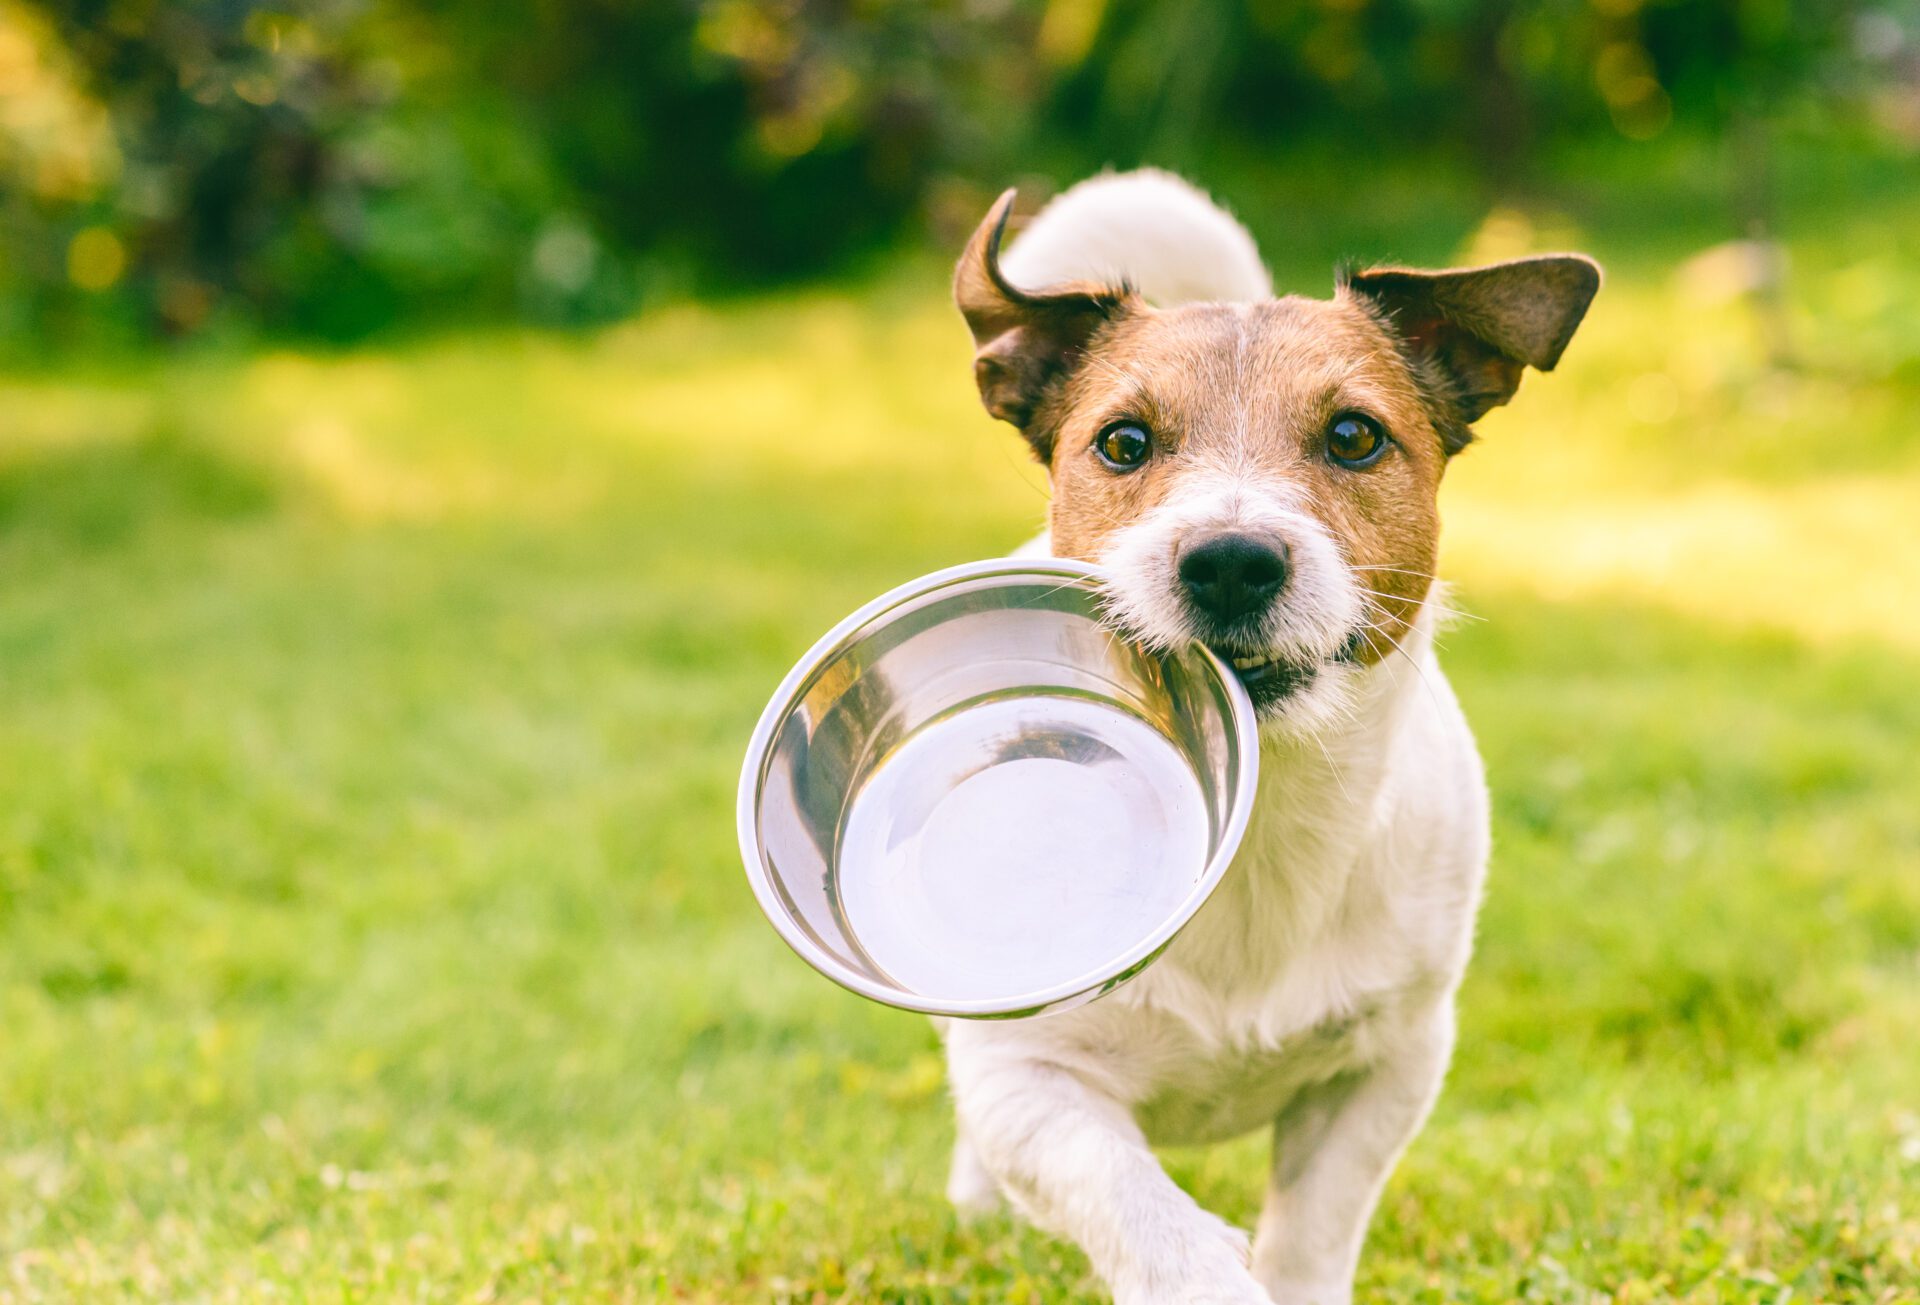 How To Feed My Dog A Ketogenic Diet